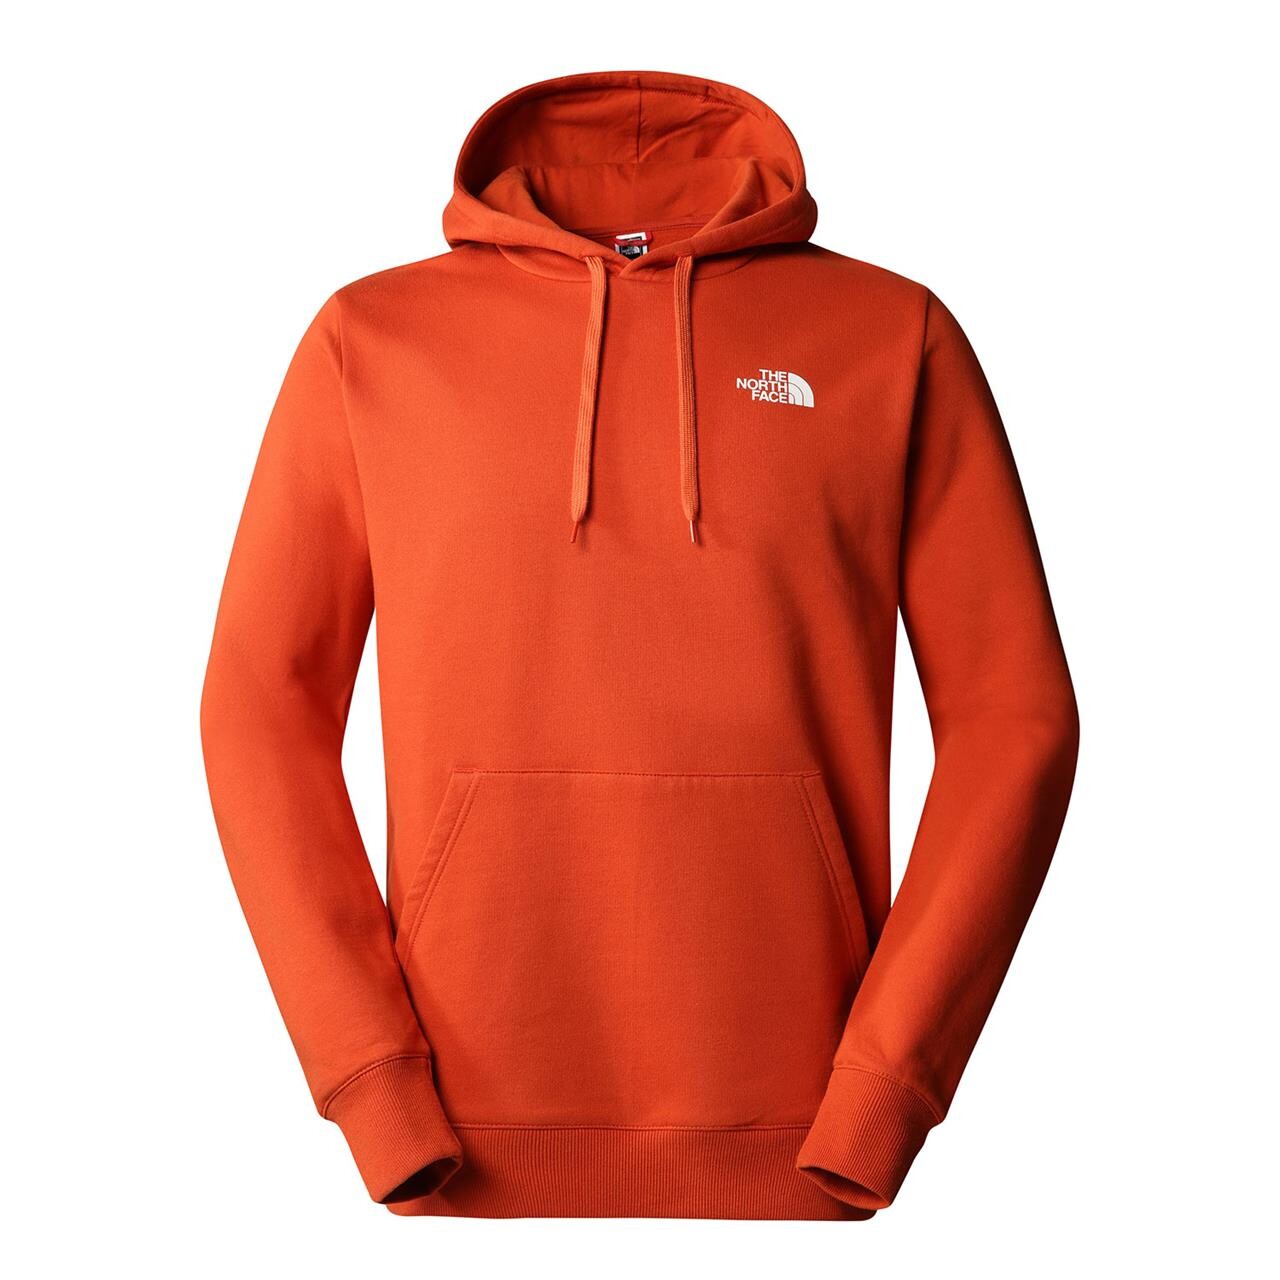 The North Face Mens Outdoor Graphic Hoodie Light (Orange (RUSTED BRONZE) Large)